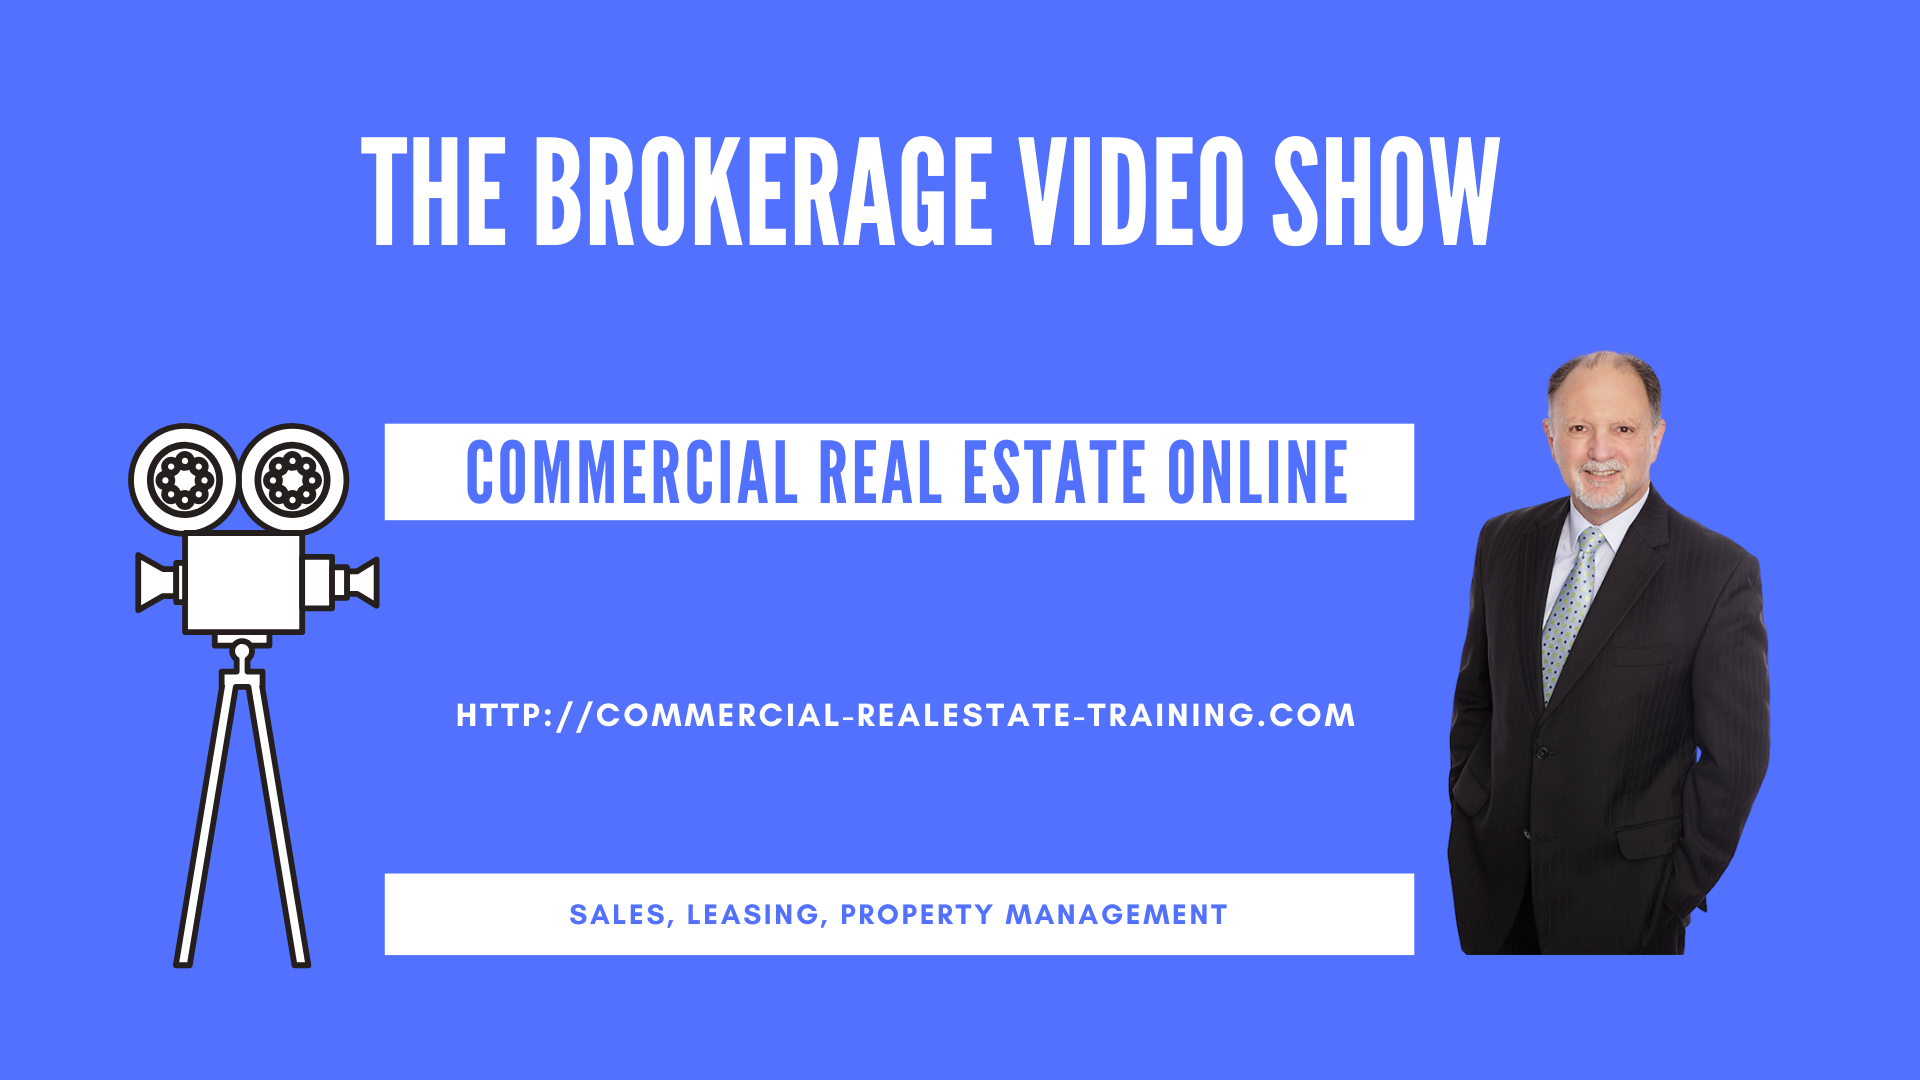 commercial real estate video show by John Highman